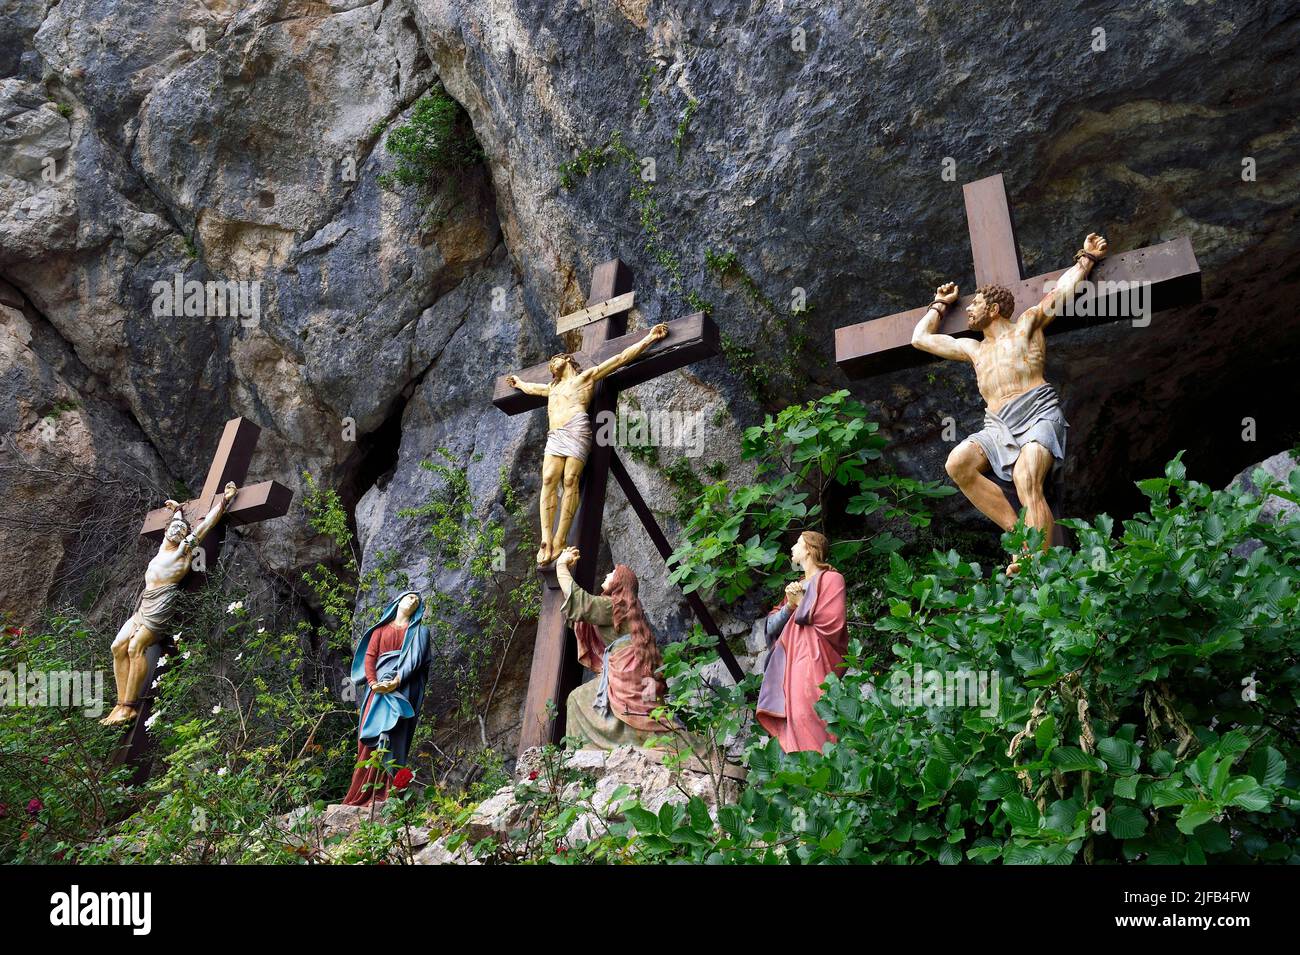 France, Var, Plan d'Aups Sainte Baume, Sainte-Baume Regional Nature Park, Sainte Baume massif, calvary in front of the cave sanctuary of Sainte Marie-Madeleine (St. Mary Magdalene), Jesus Christ surrounded by the good and the bad thief, the Virgin Mary, Saint John and Mary Magdalene at his feet Stock Photo